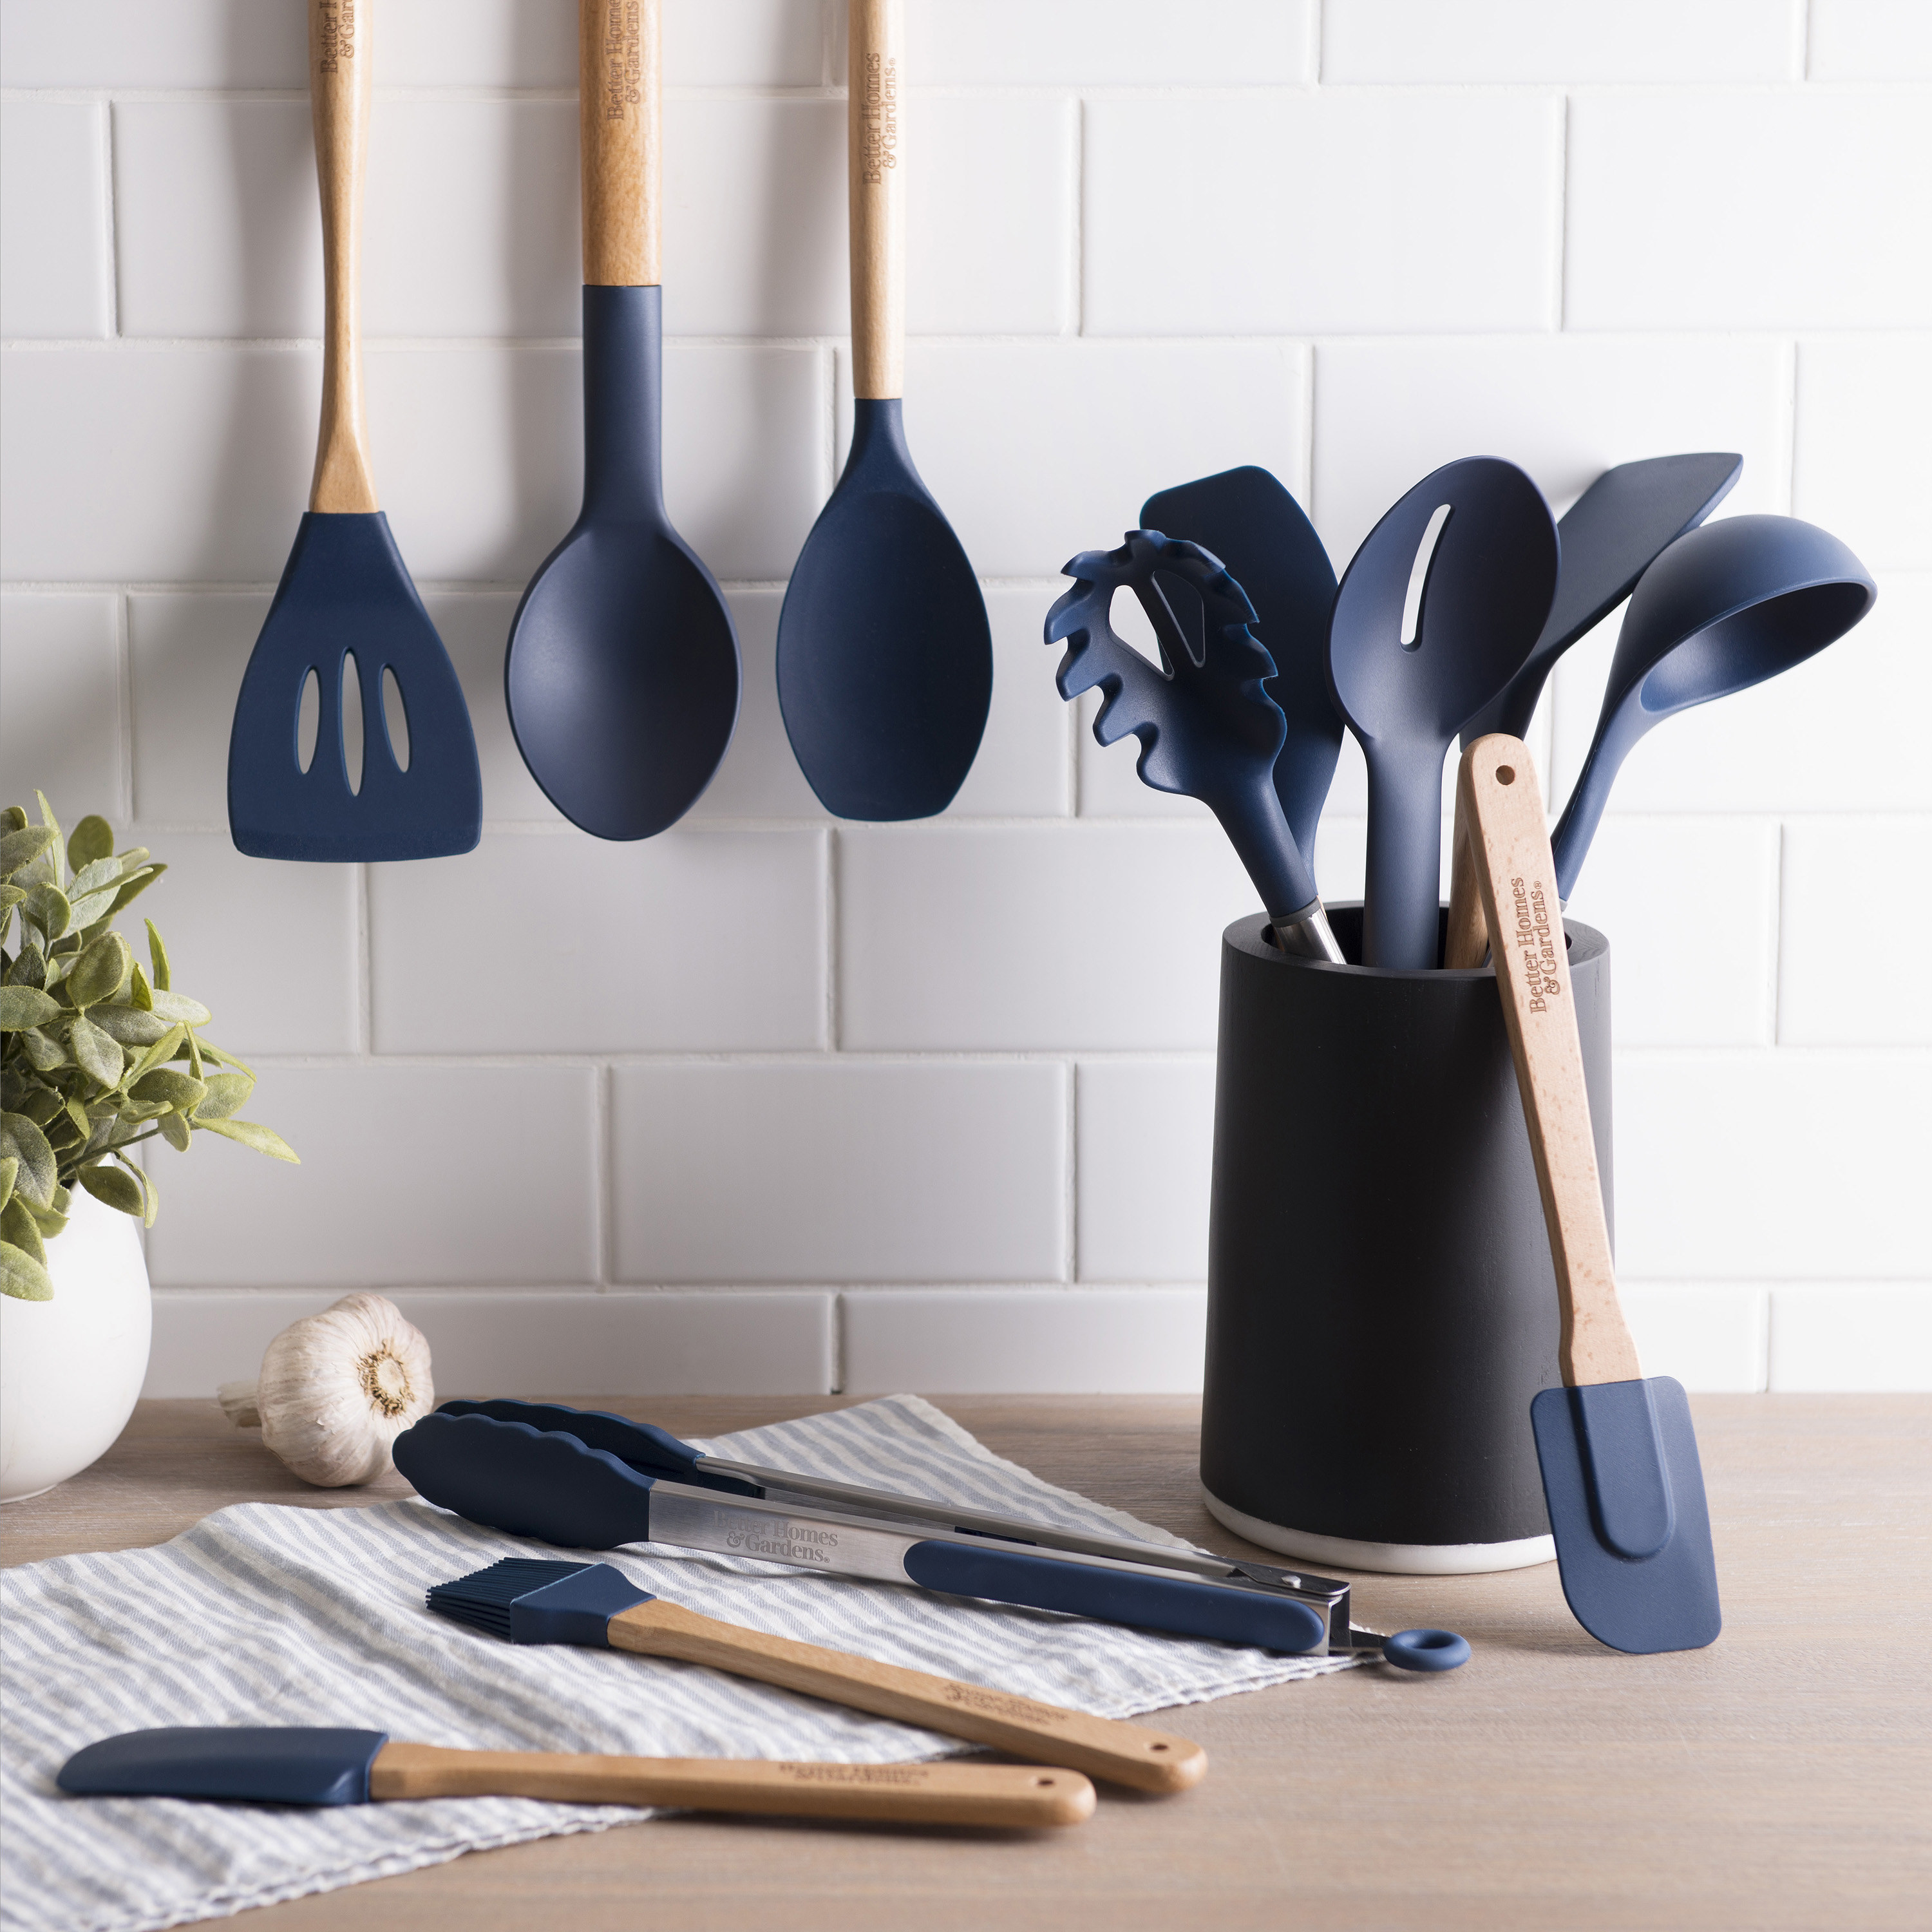 All 12 of the utensils in the set showcased in a kitchen